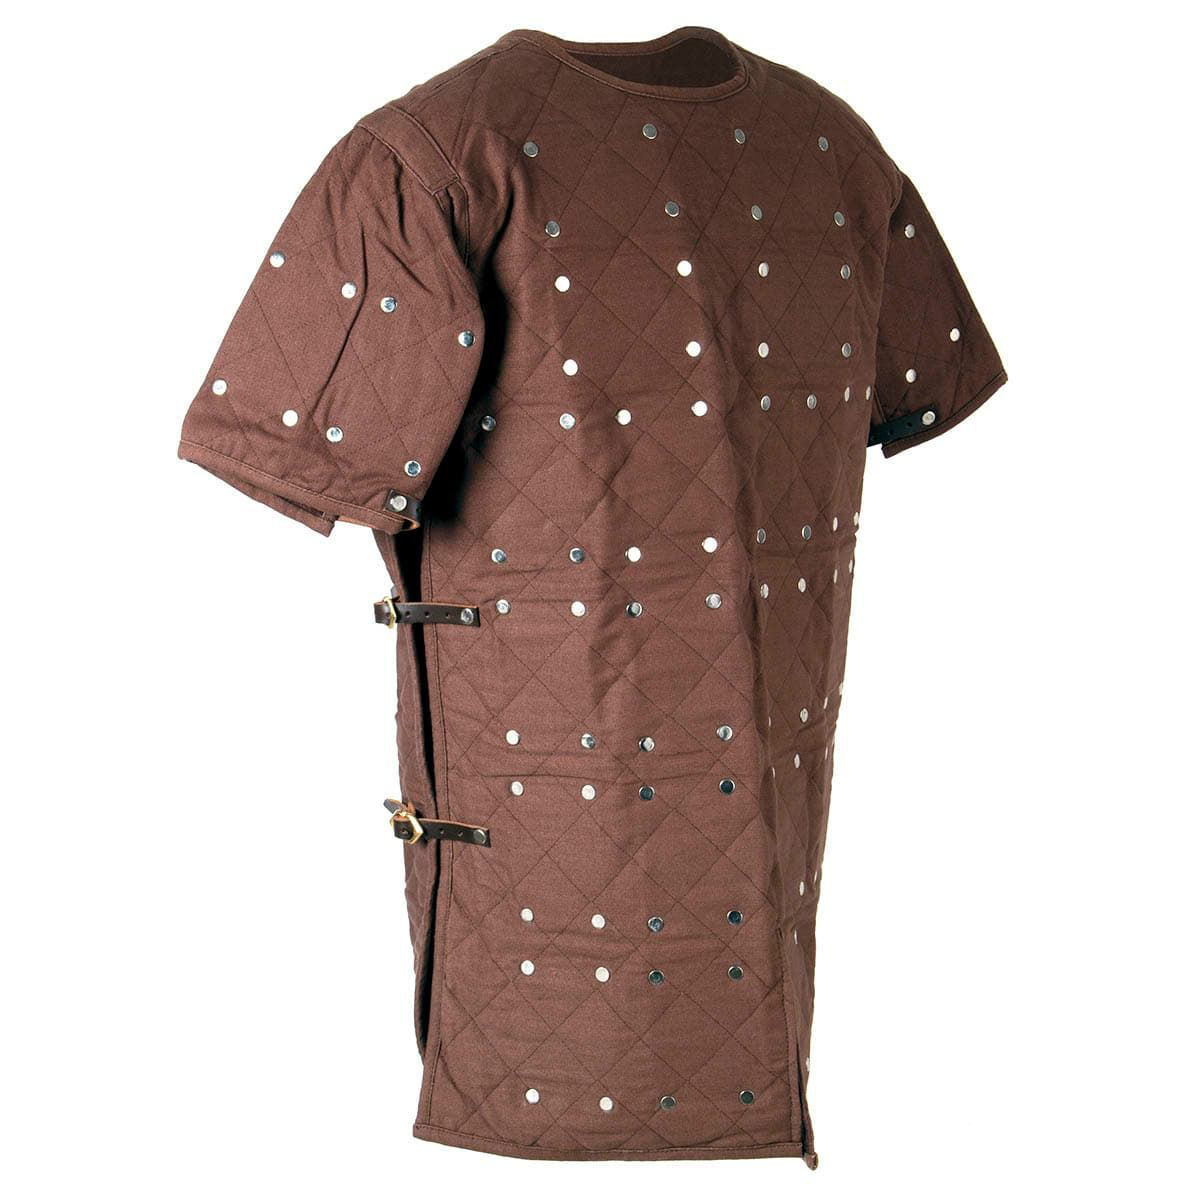 Cotton Brigandine with riveted 16 gauge steel plate inserts copied from late medieval, early Renaissance examples